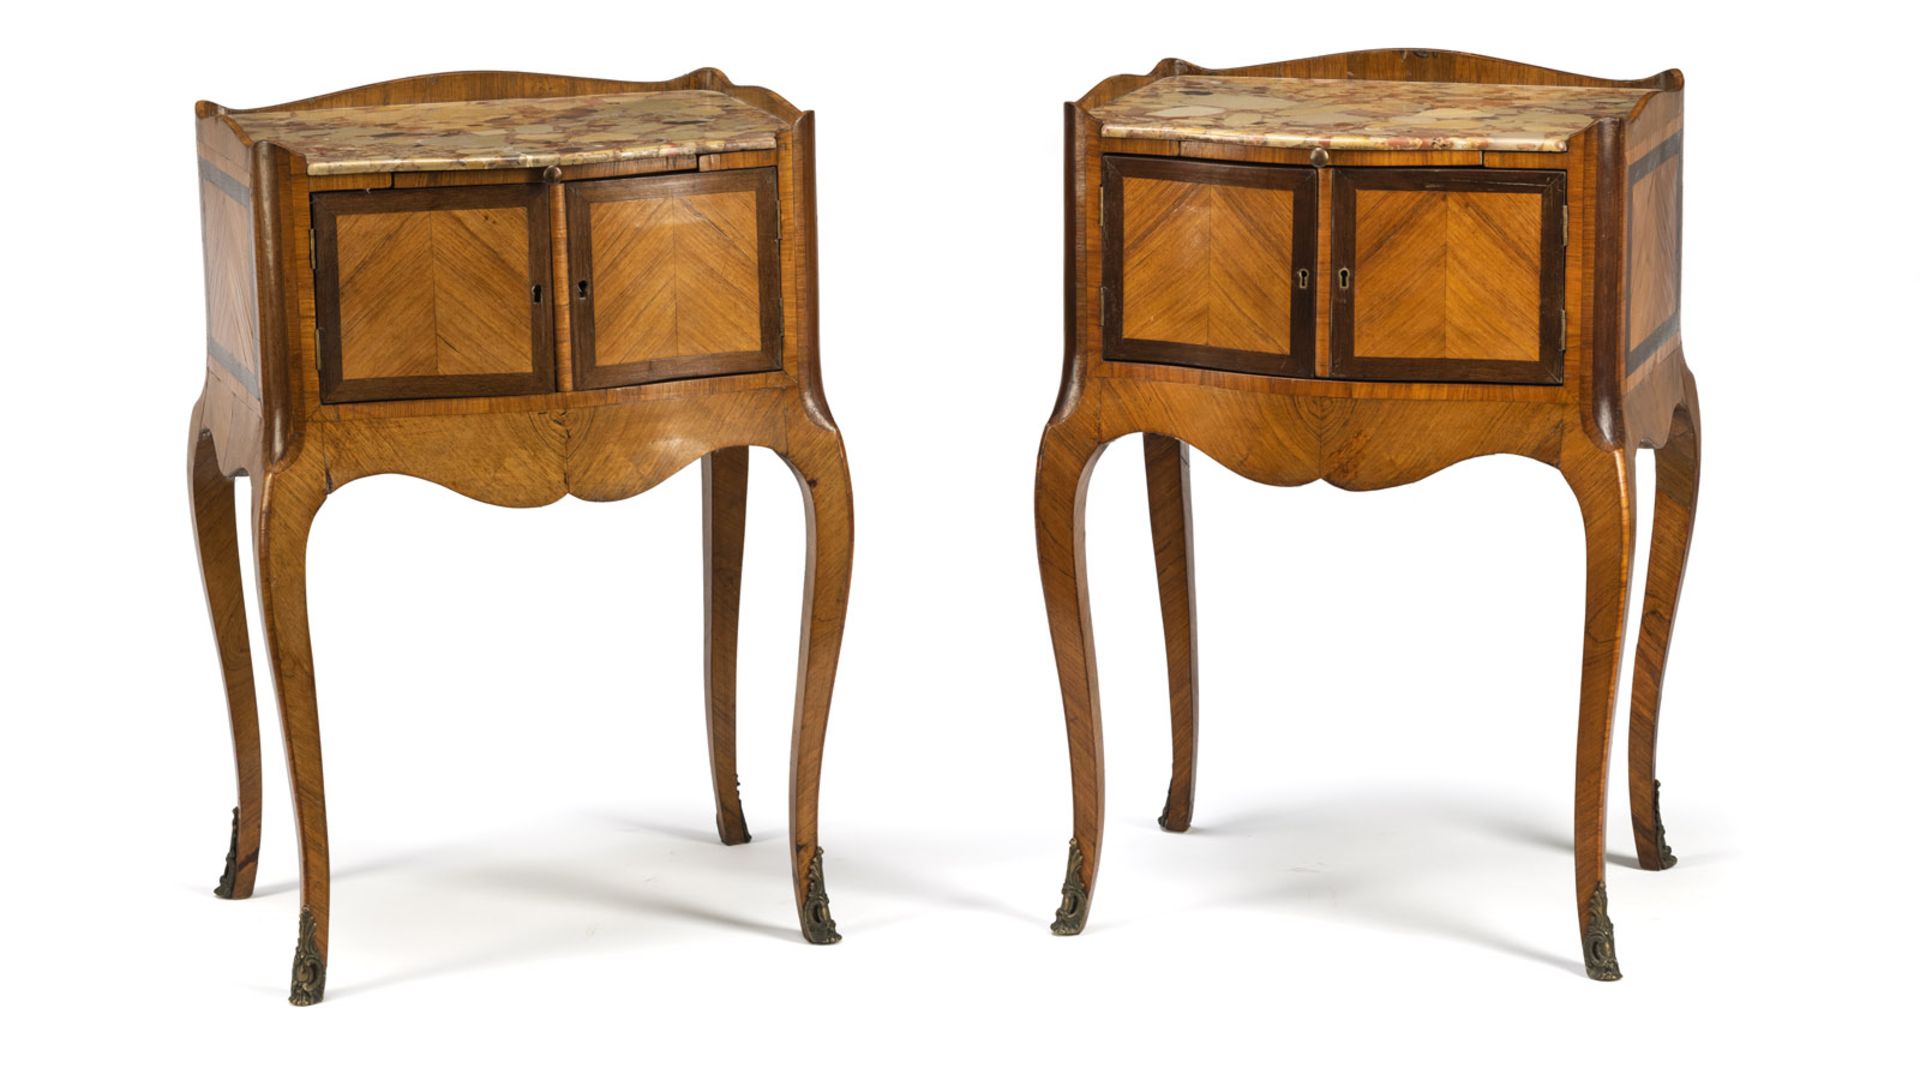 A PAIR OF FRENCH LOUIS-XV-STYLE ORMOLU MOUNTED TULIPWOOD AND AMARANTH OCCATIONAL TABLES - Image 2 of 9